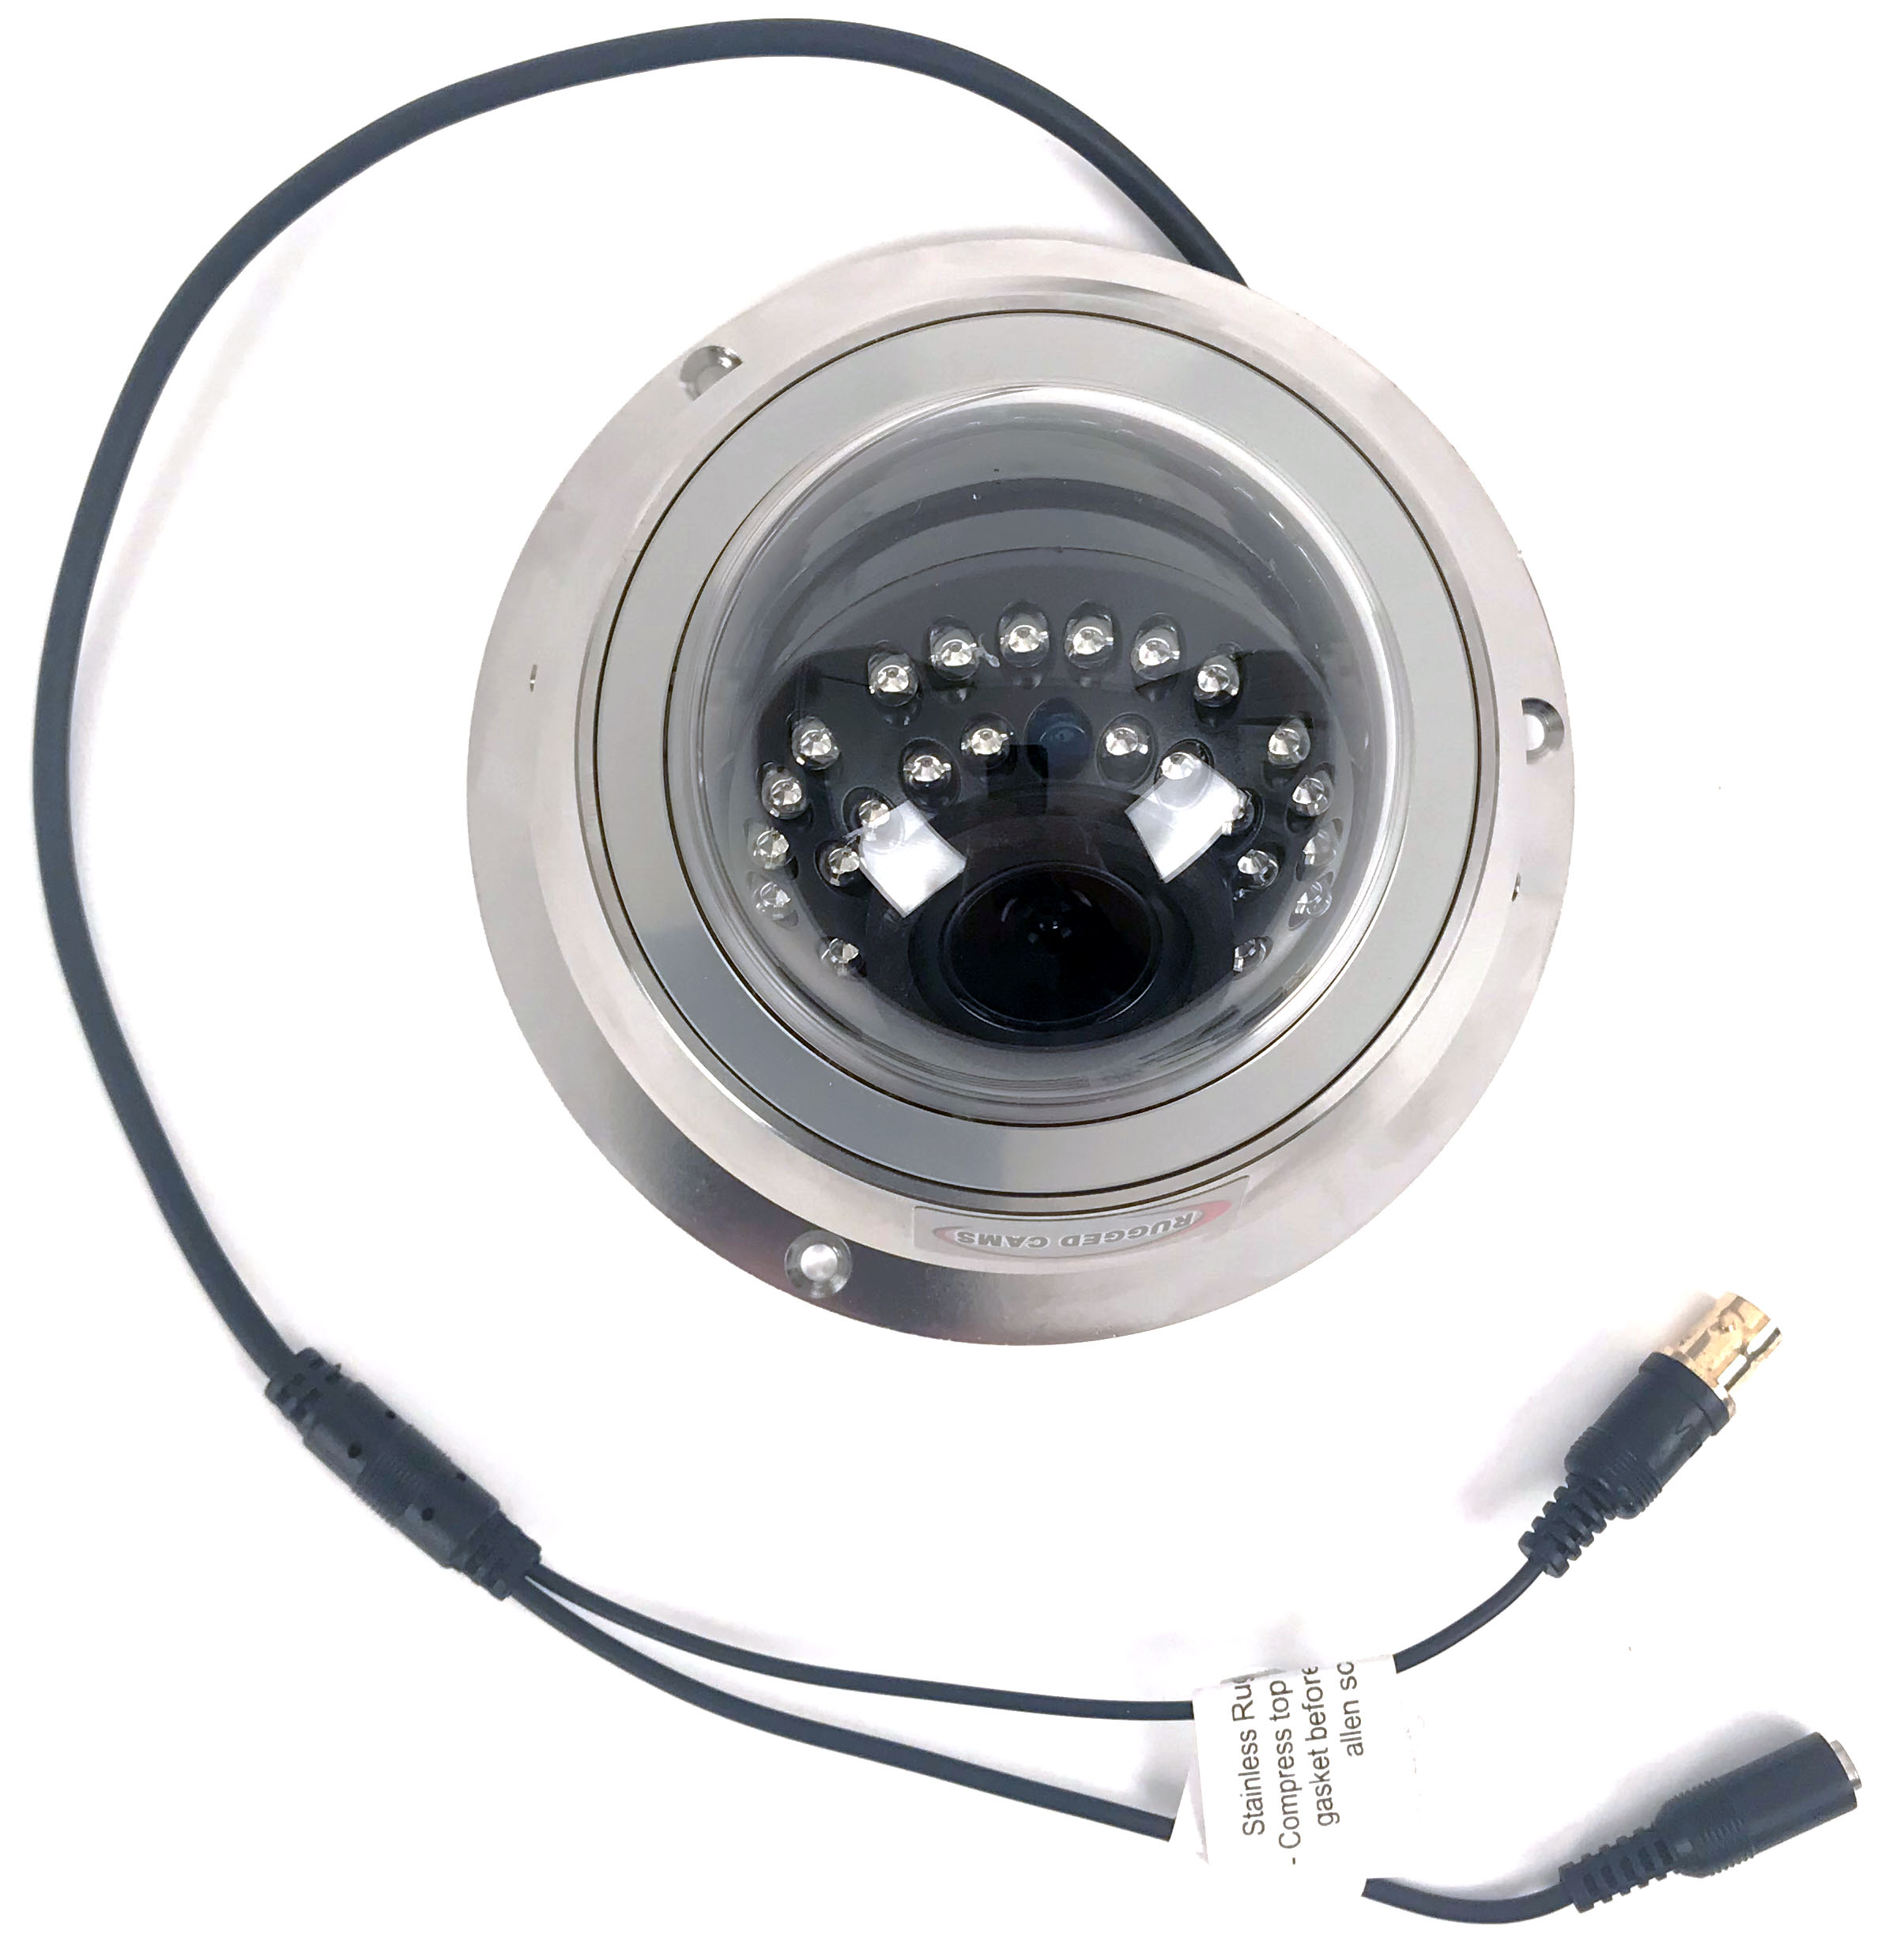 Stainless Steal Dome security camera